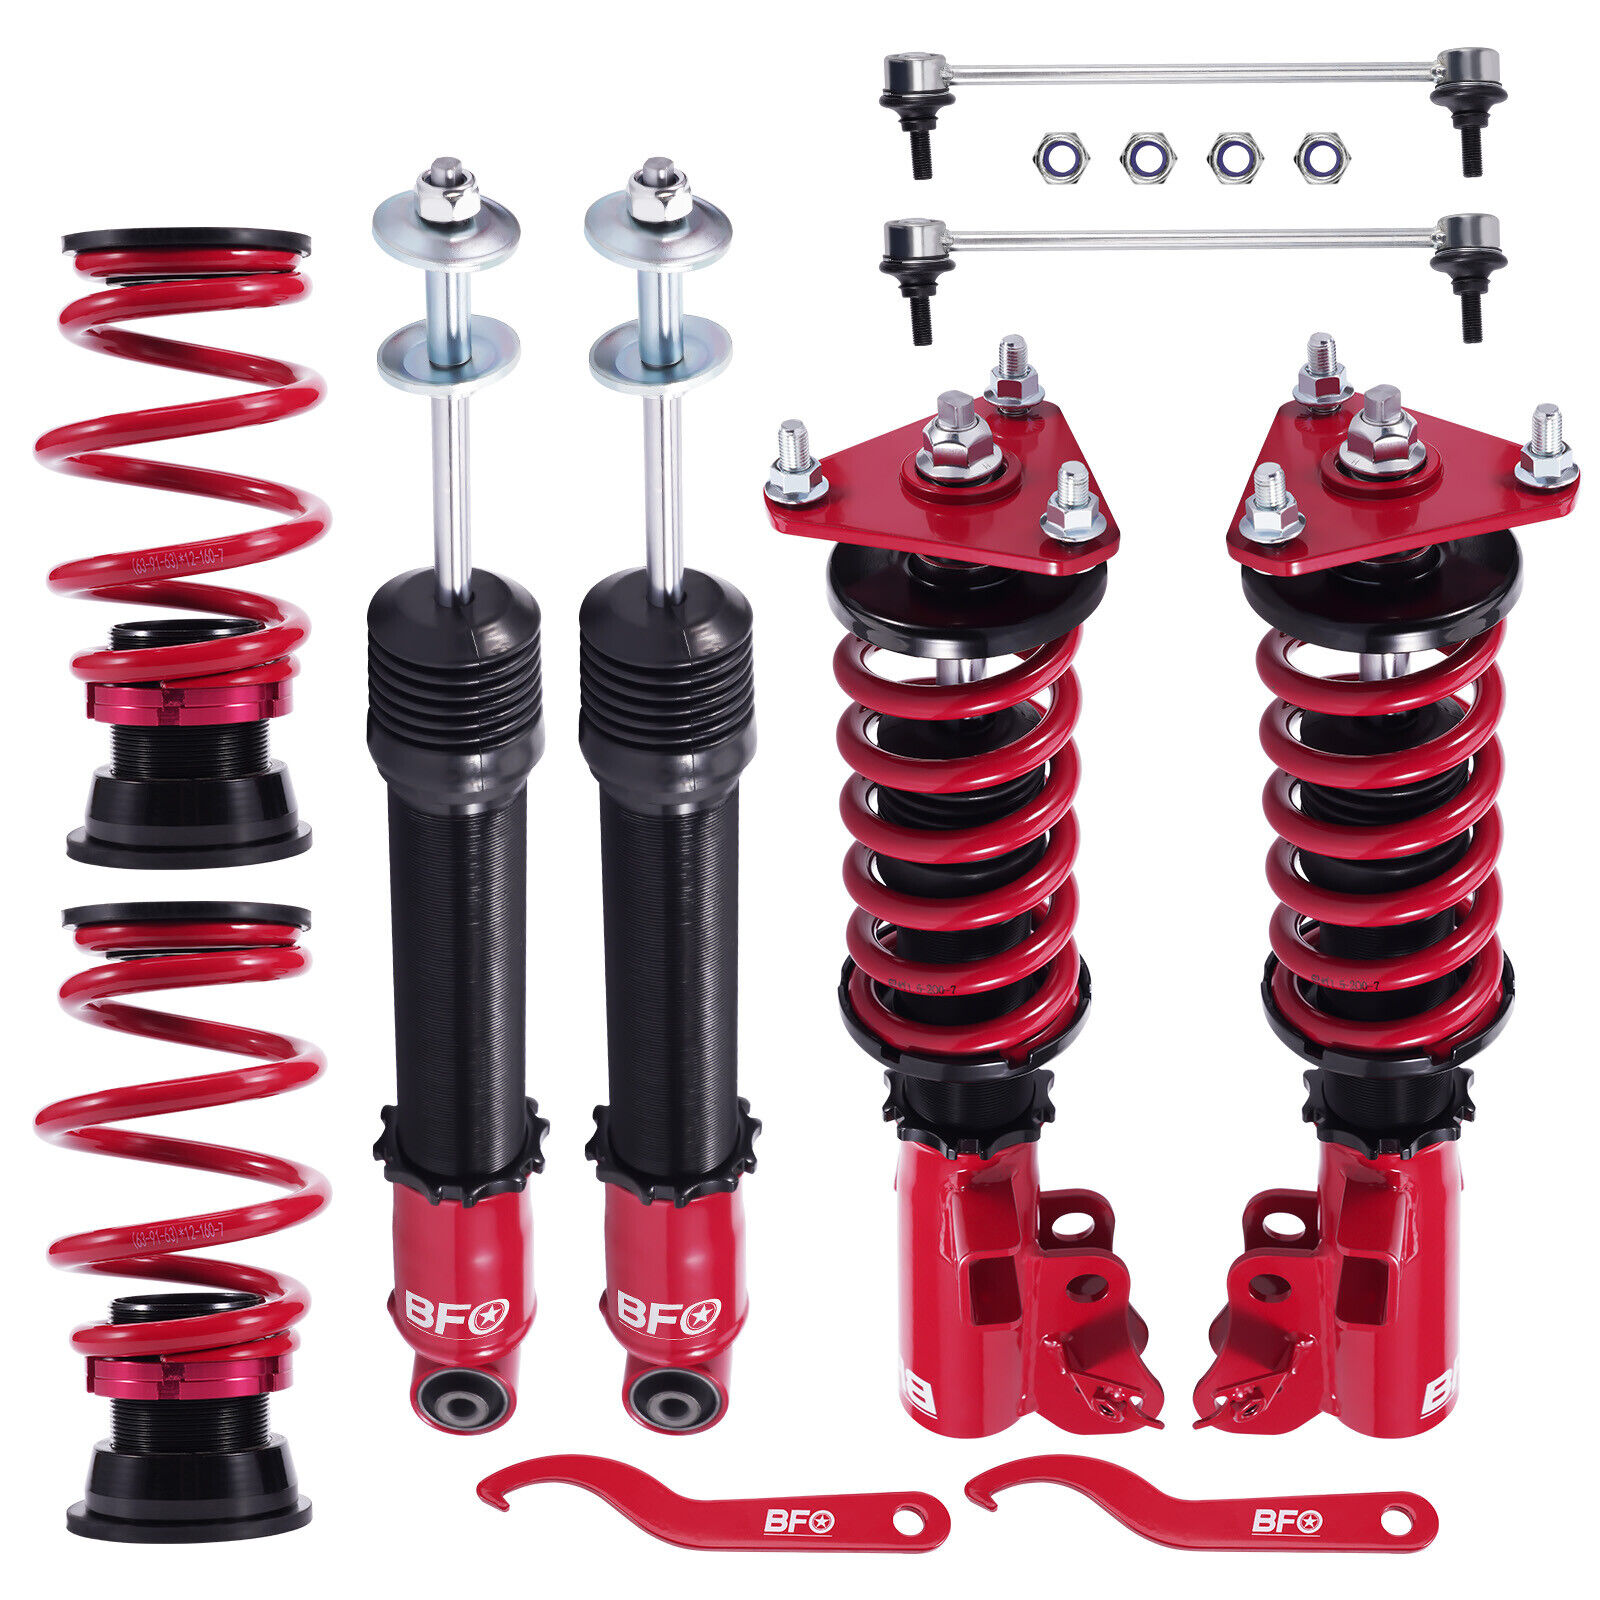 Coilovers Struts Adjustable Height Suspension Springs For Honda Civic 2012-2015